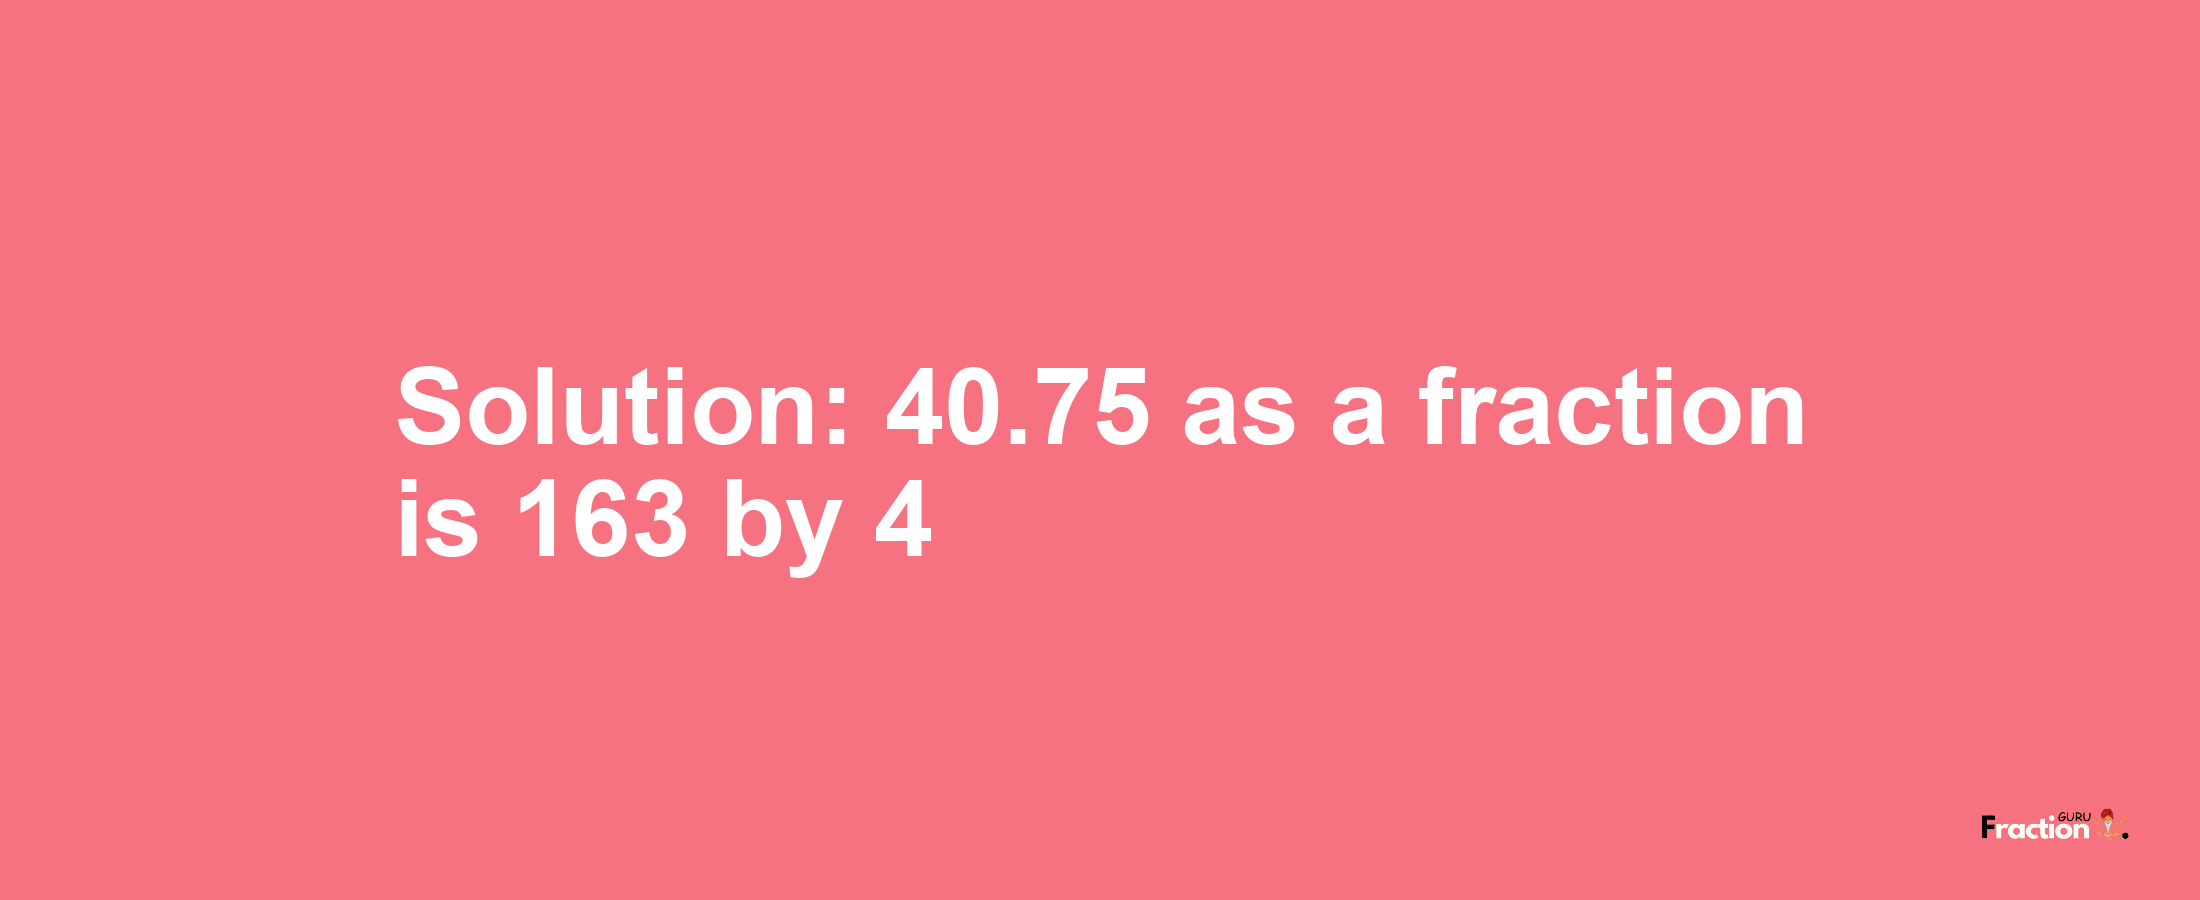 Solution:40.75 as a fraction is 163/4